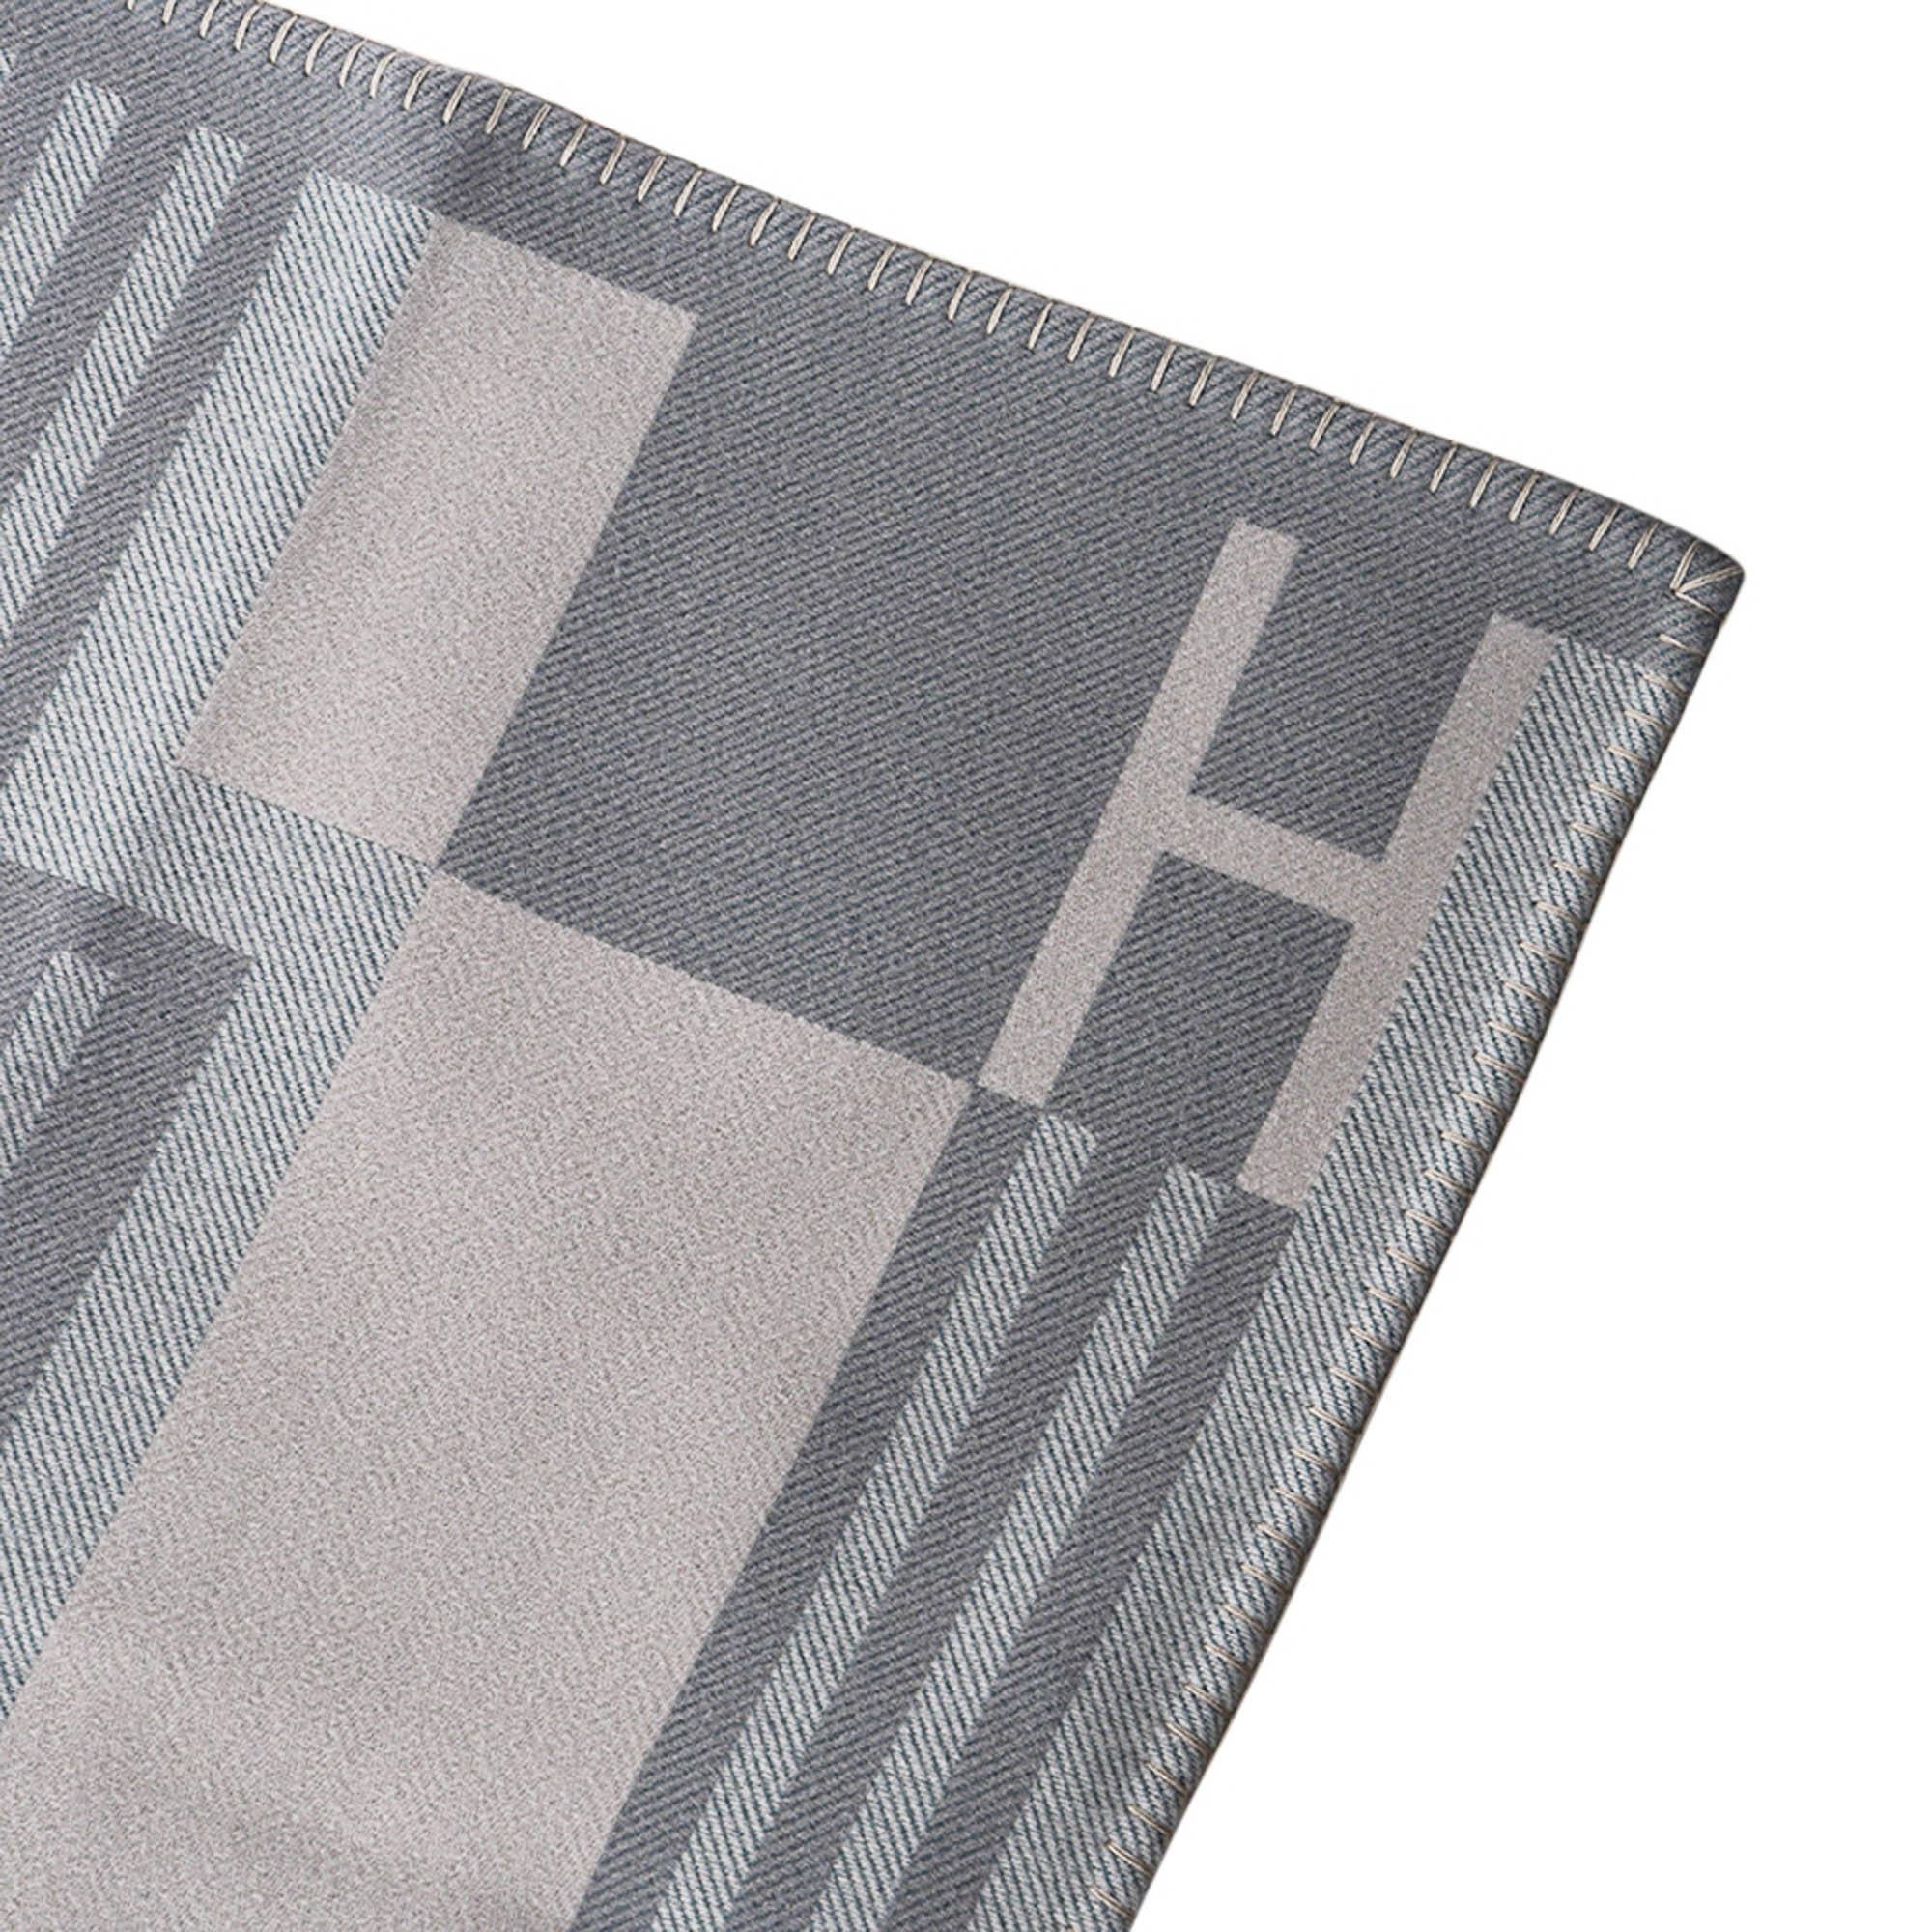 Hermes Ithaque Blanket Gris Perle Wool and Cashmere 1